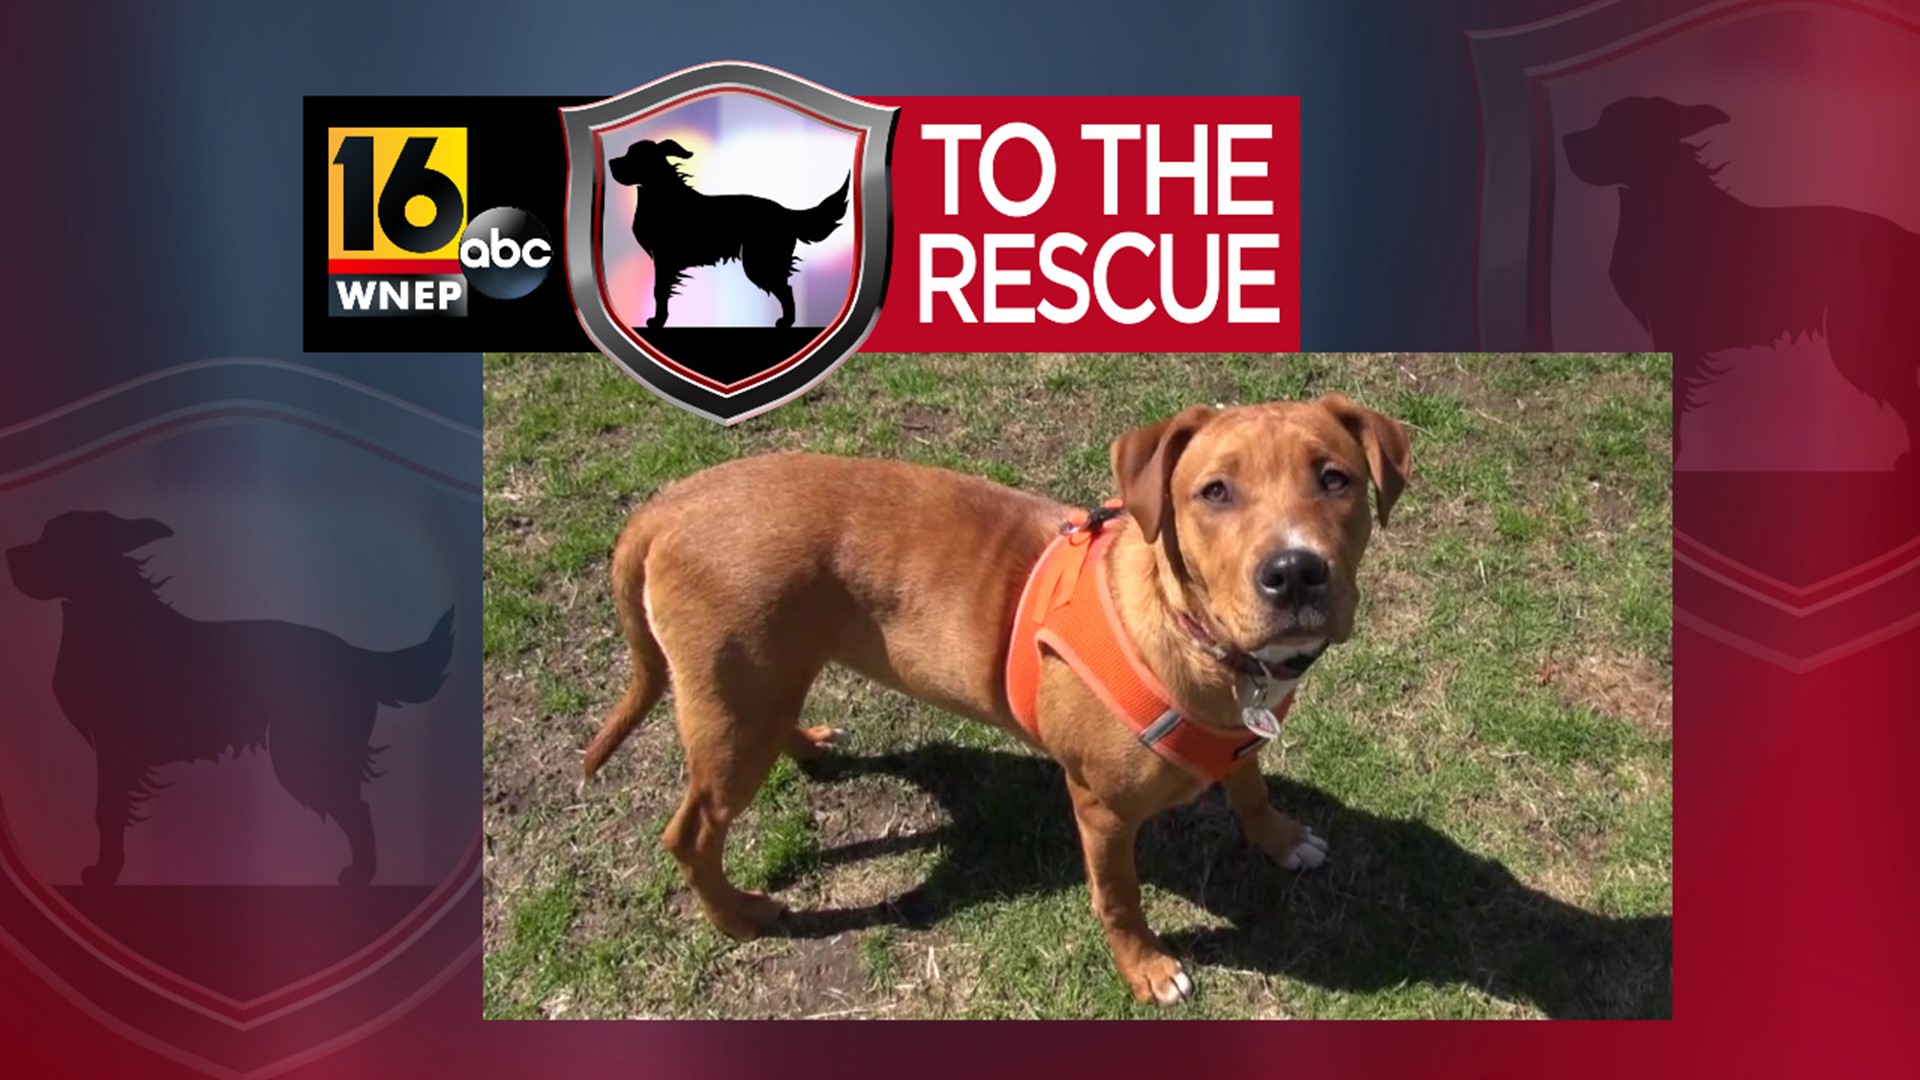 In this week's 16 To The Rescue, we meet a 5-month-old puppy named Daisy looking for the right family to train her and love her forever.